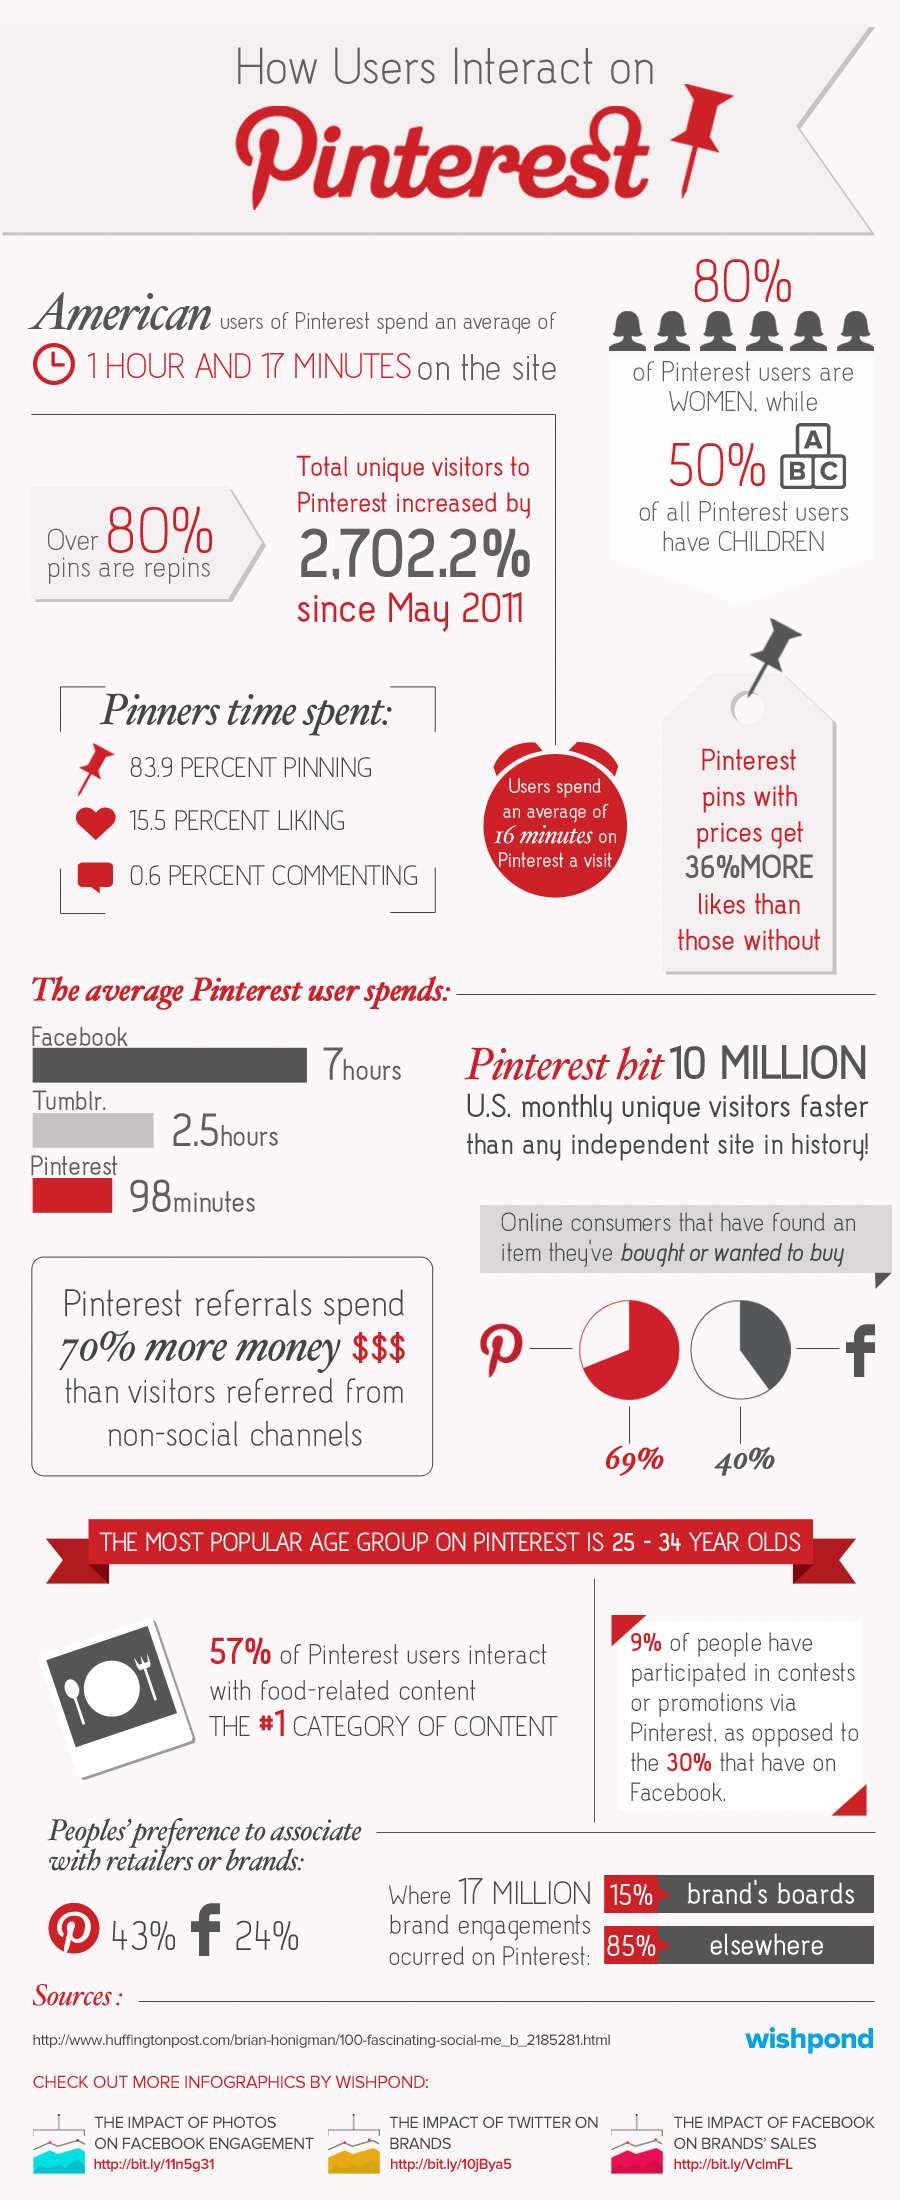 How users interact on Pinterest – Some good stats here